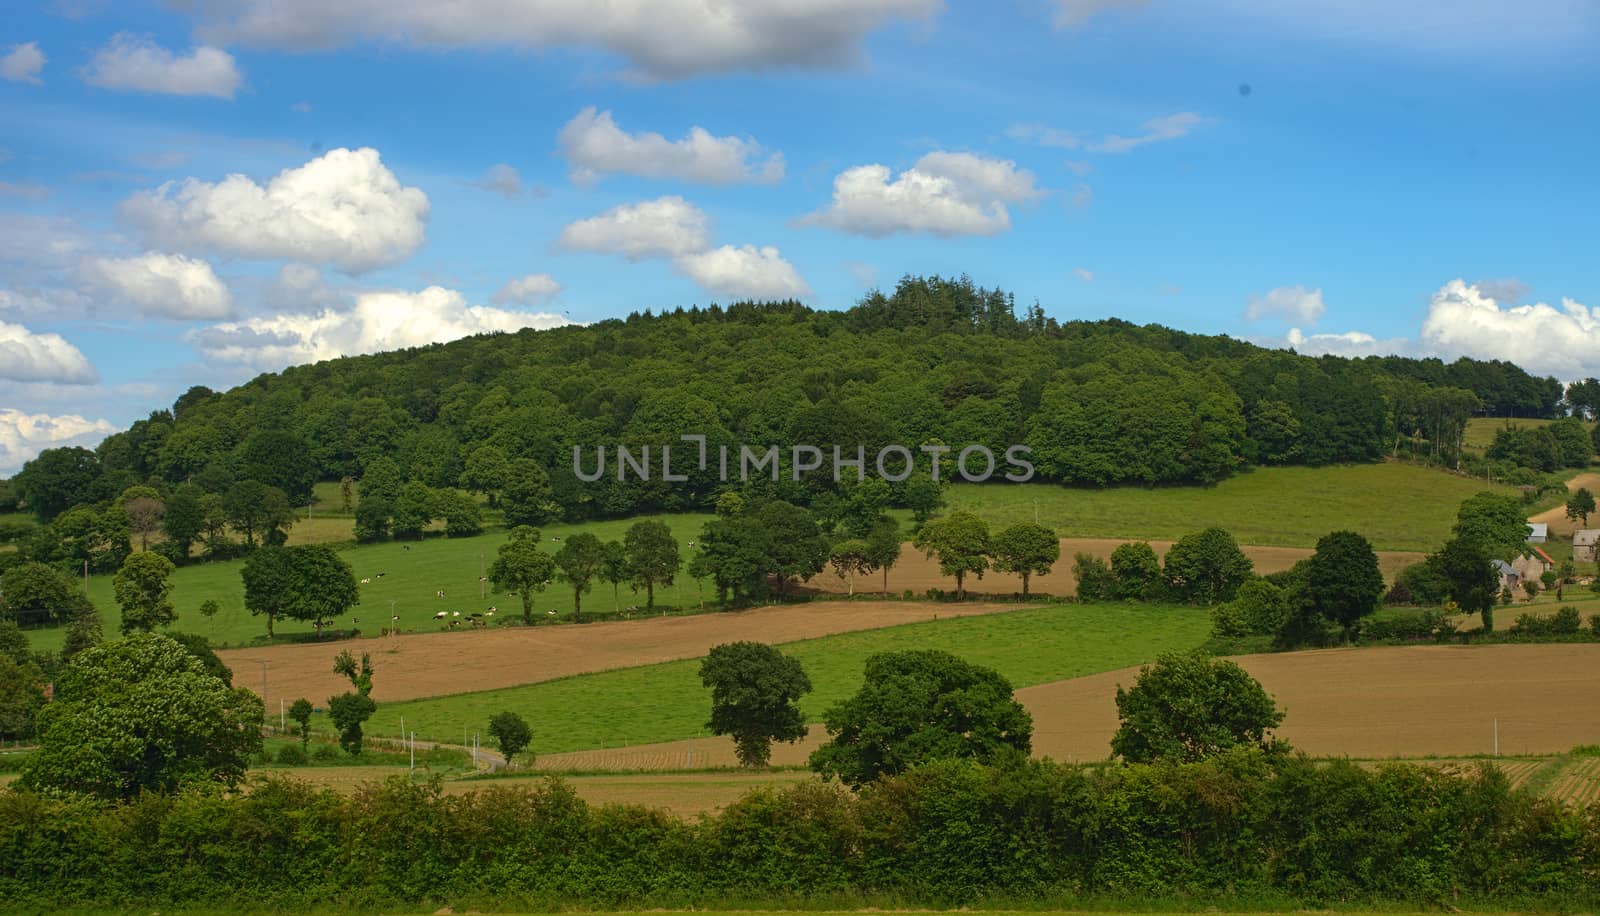 View on the hill and tranquil landscape in rural Normandy